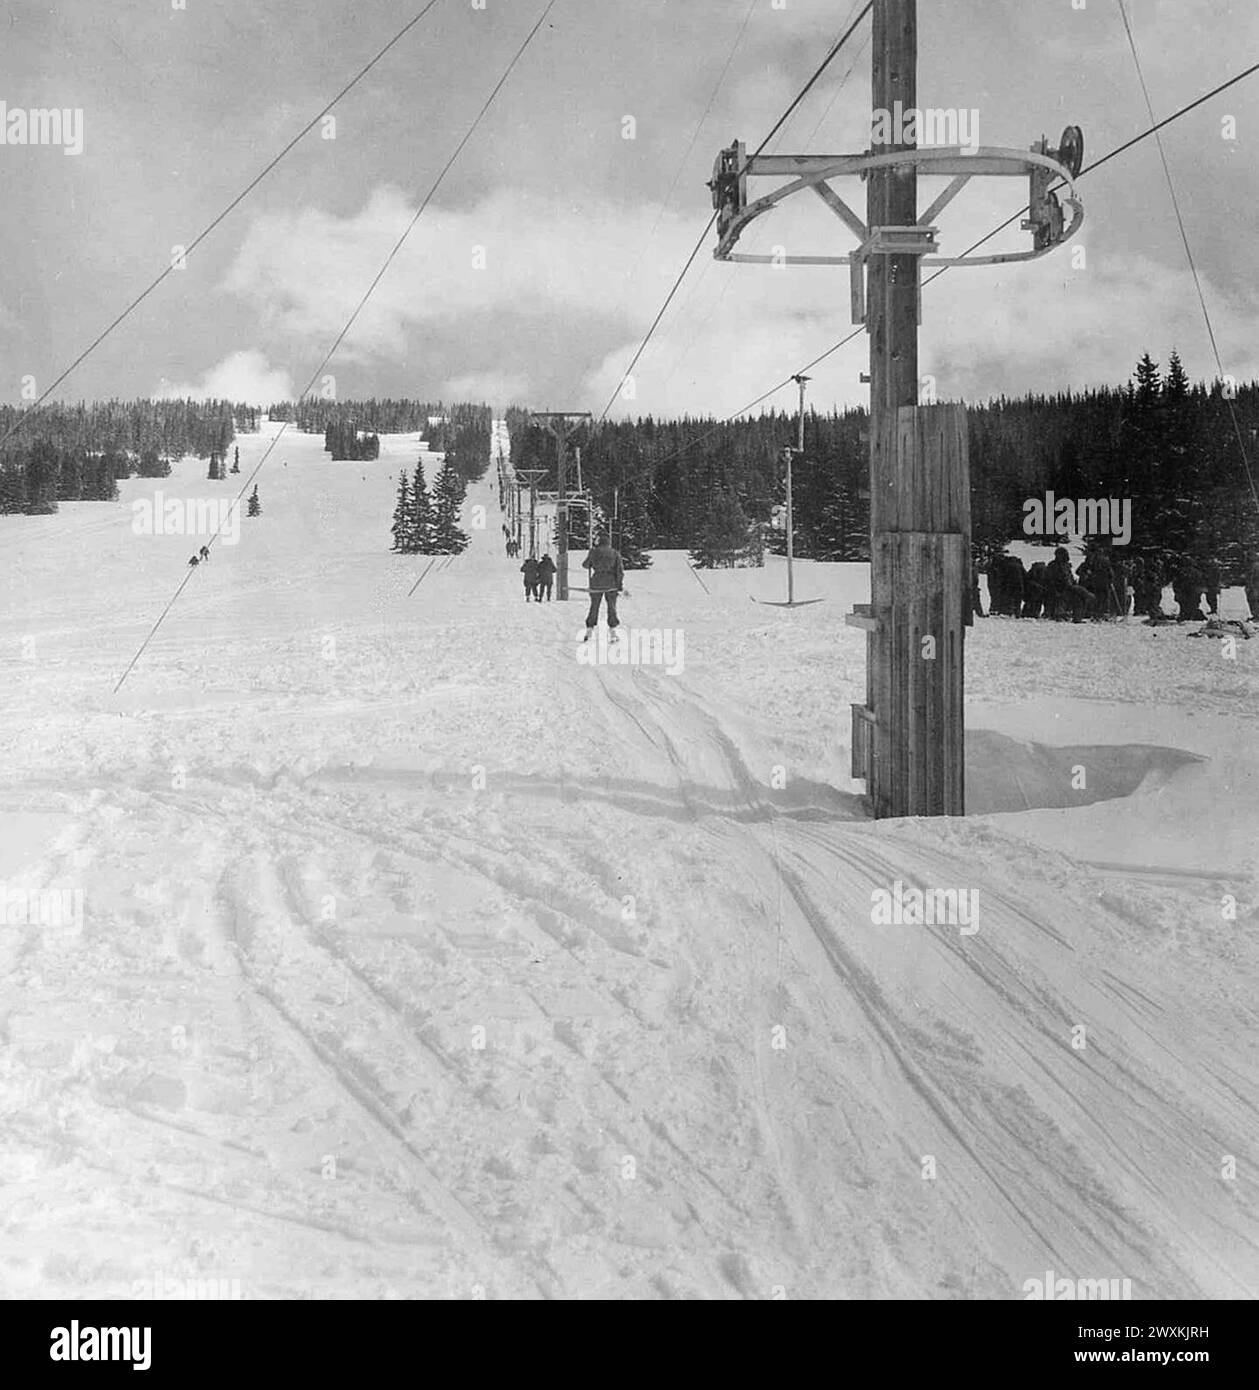 Original Caption: Men of the Mountain and Cold Weather Training Command, Camp Hale, Colorado utilizing the ski lift at the Cooper Hill ski slope located outside of Camp Hale, Colorado ca. March 1956 Stock Photo